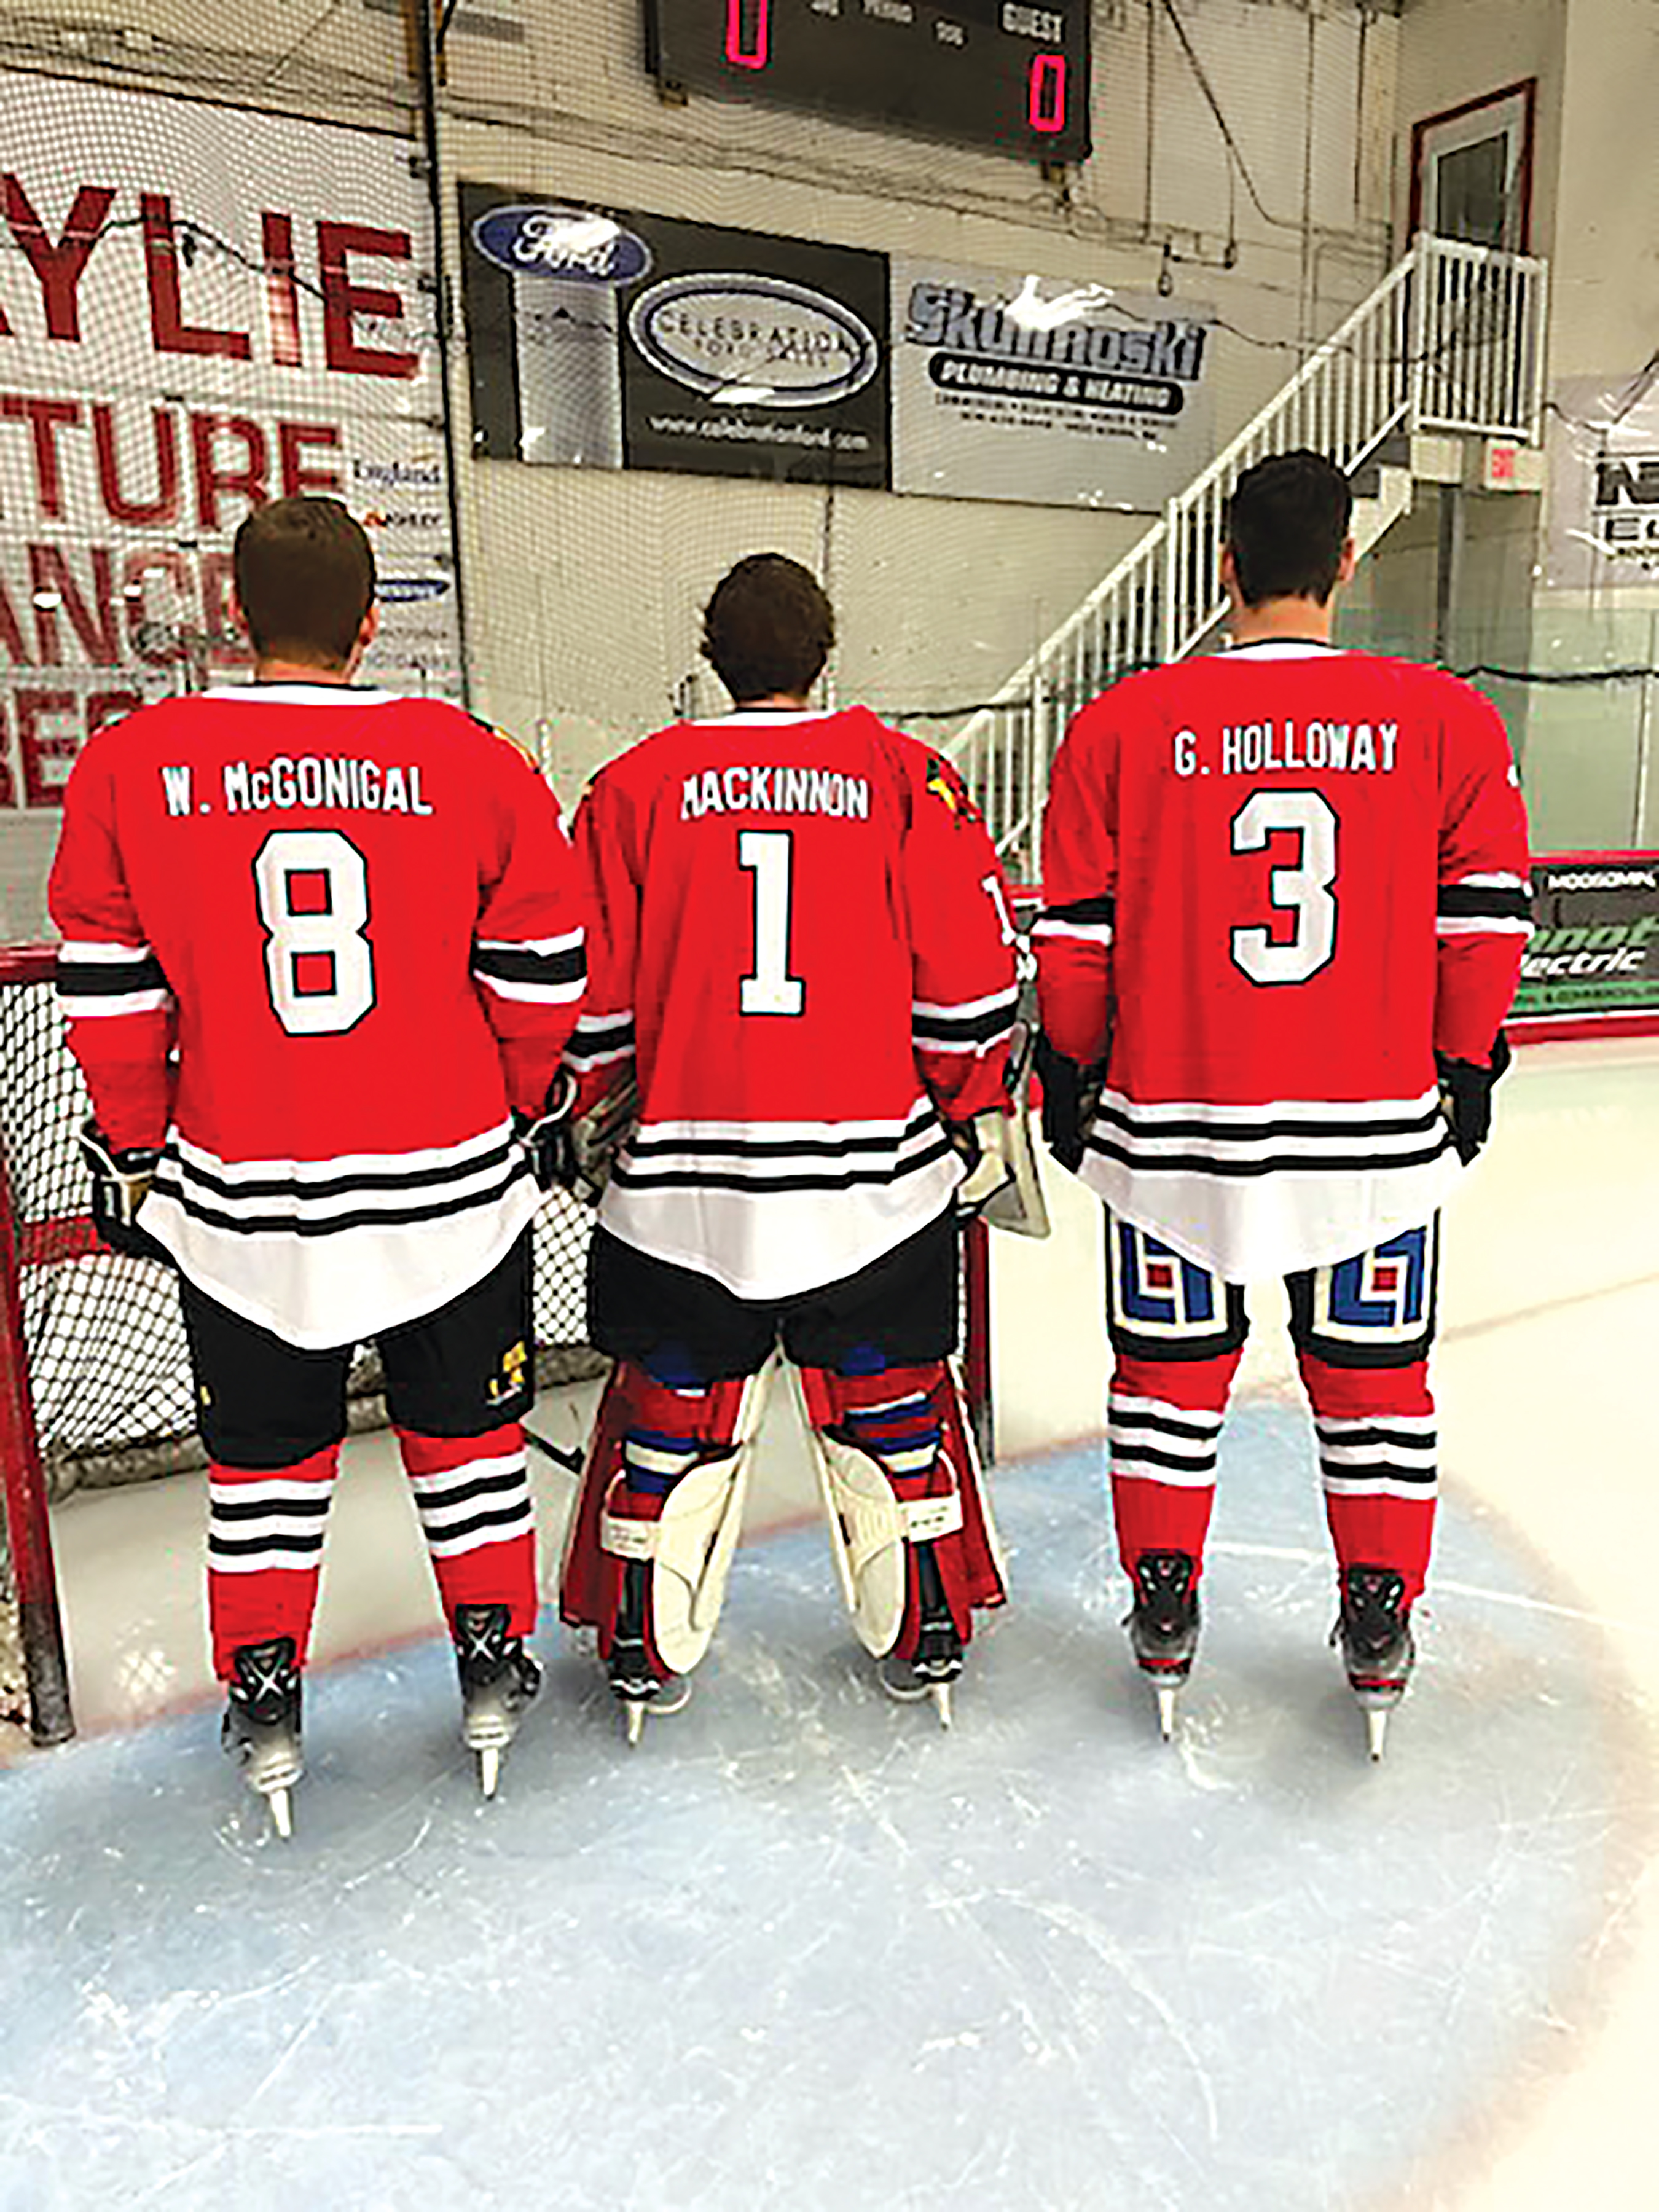 Devin McGonigal wearing the jersey of his relative Winston McGonigal, Levi Horn wearing his great grandfather’s jersey, and Bud Holloway wearing his grandfather George Holloway’s jersey. All of the Rangers will be wearing the jerseys of former Blackhawks players during the Jan. 15 game.